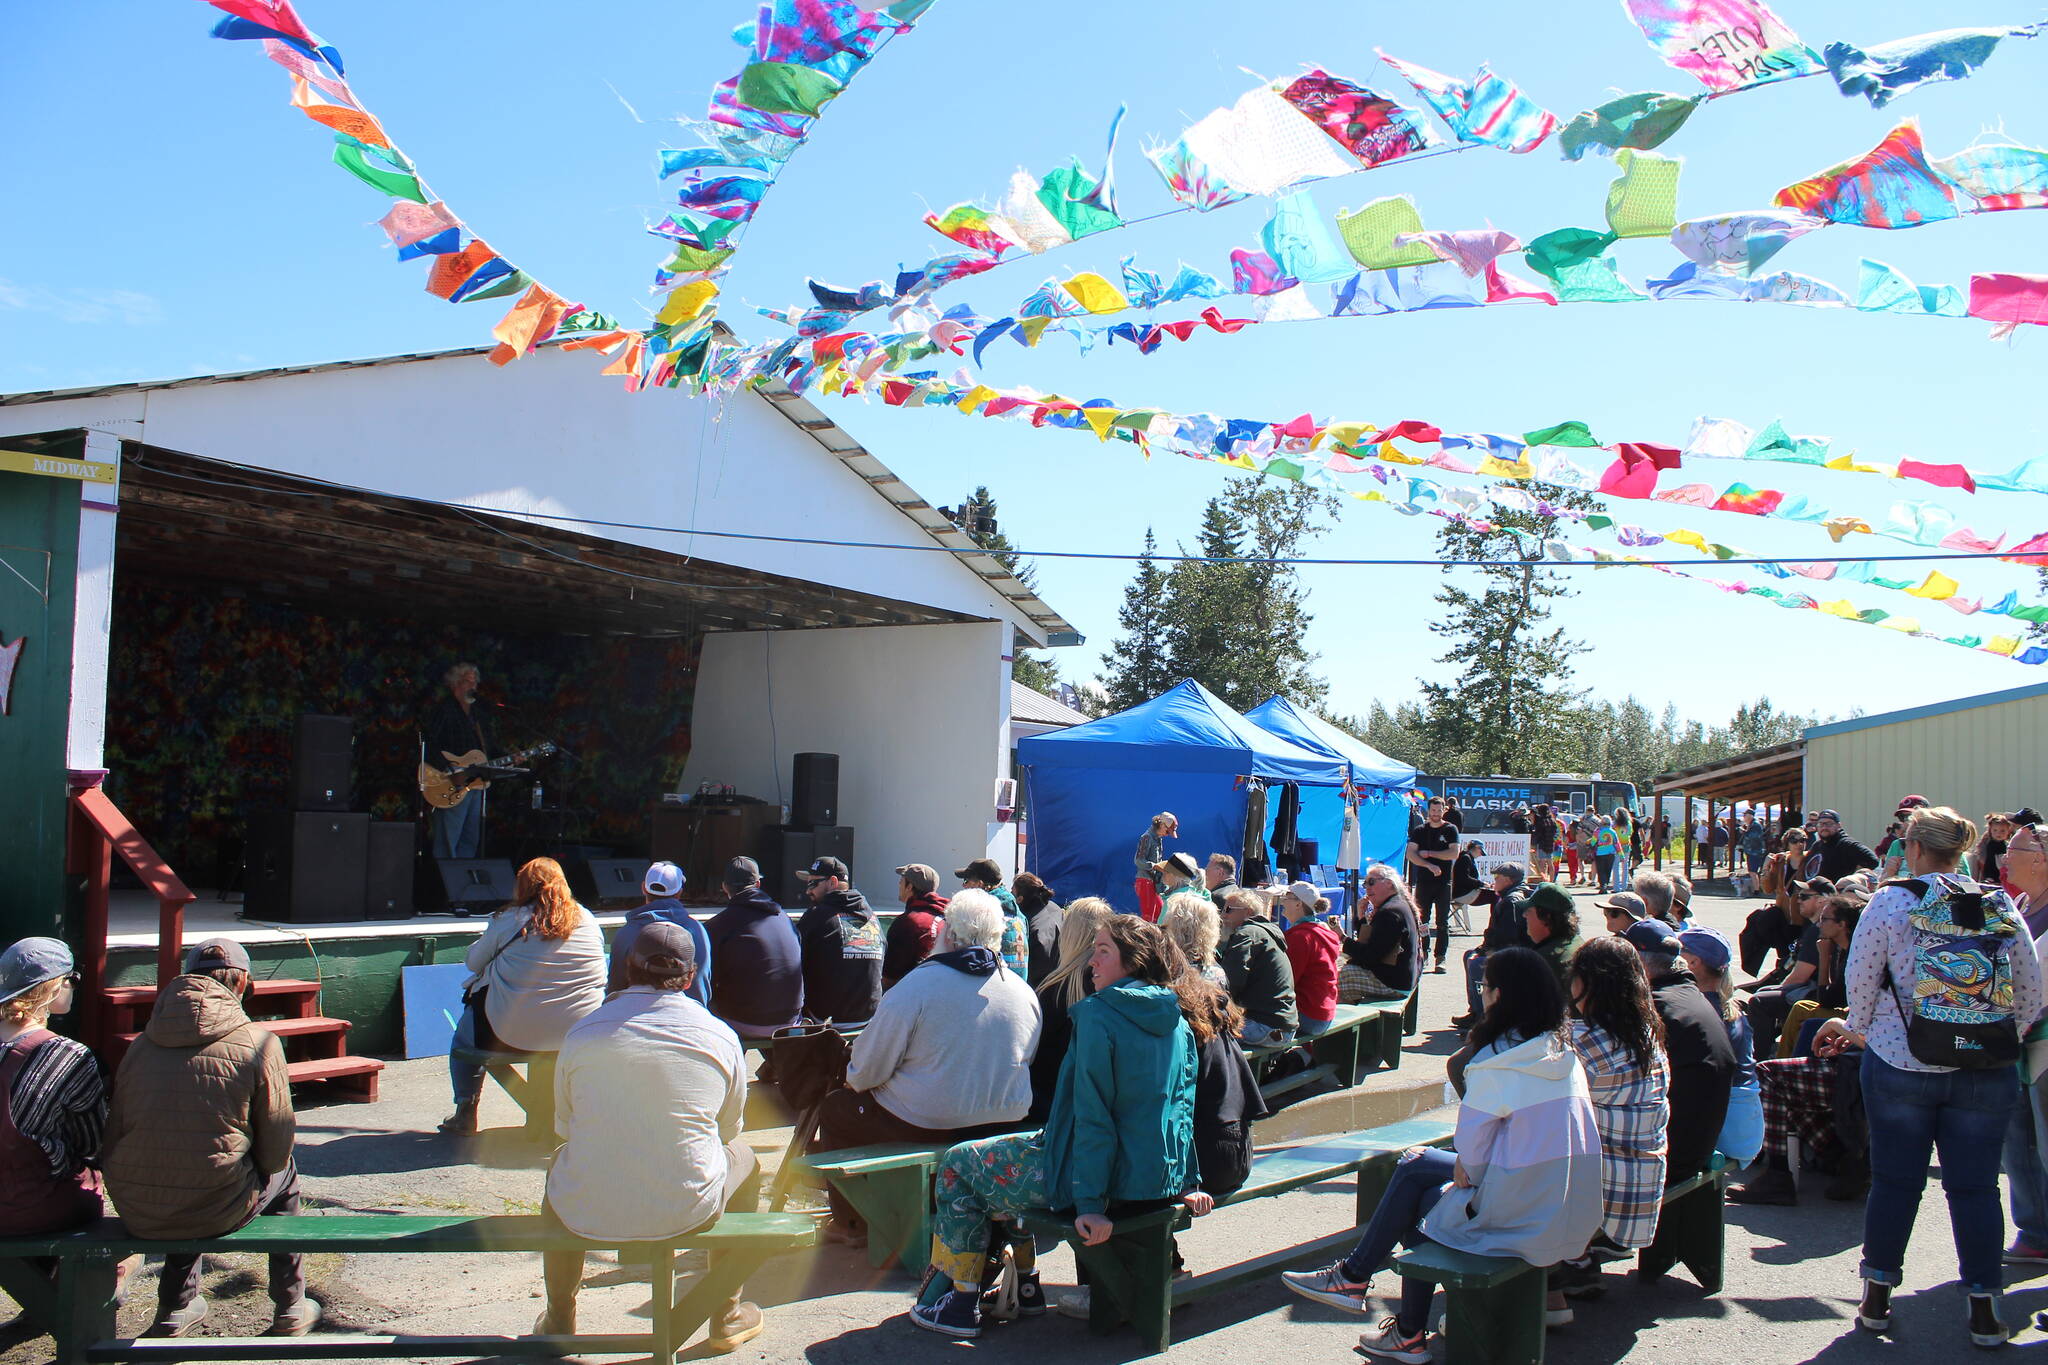 People gather in Ninilchik, Alaska on Friday, Aug. 5, 2022 for Salmonfest, an annual event that raises awareness about salmon-related causes. (Ashlyn O’Hara/Peninsula Clarion)